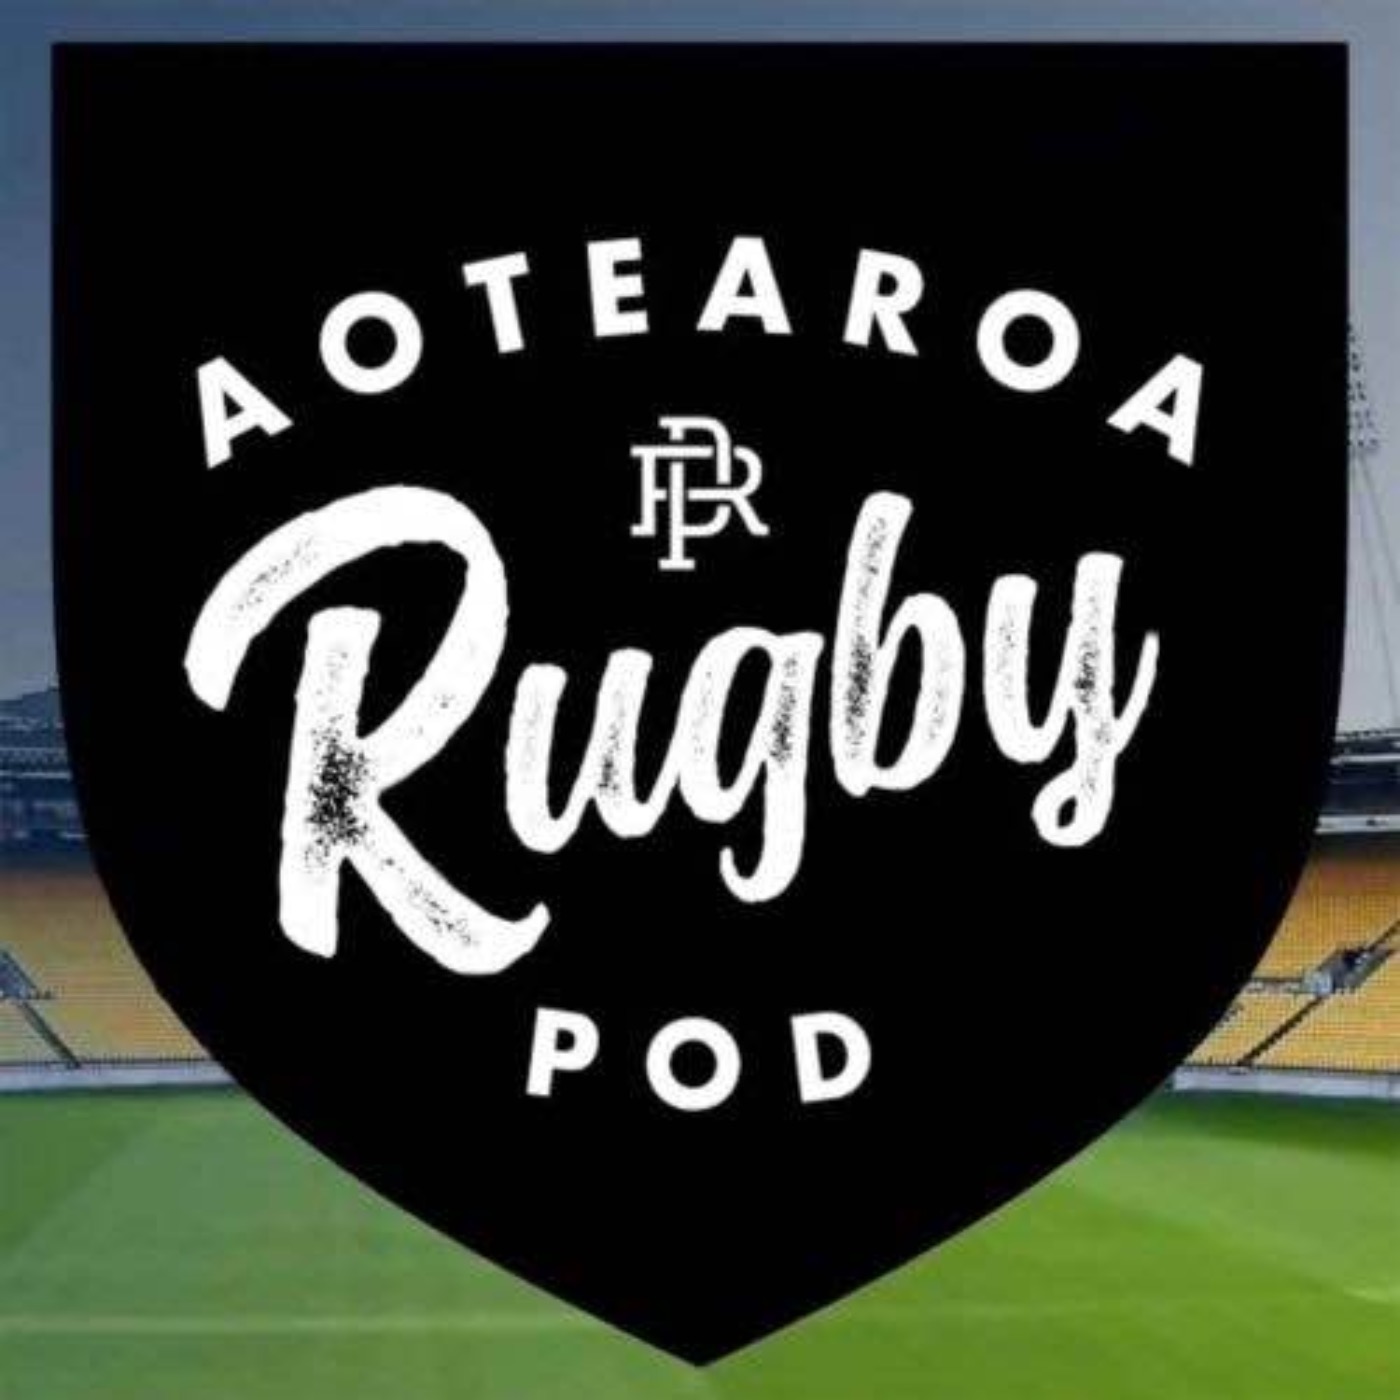 International Rugby is back! discussing who impressed in an epic opening week